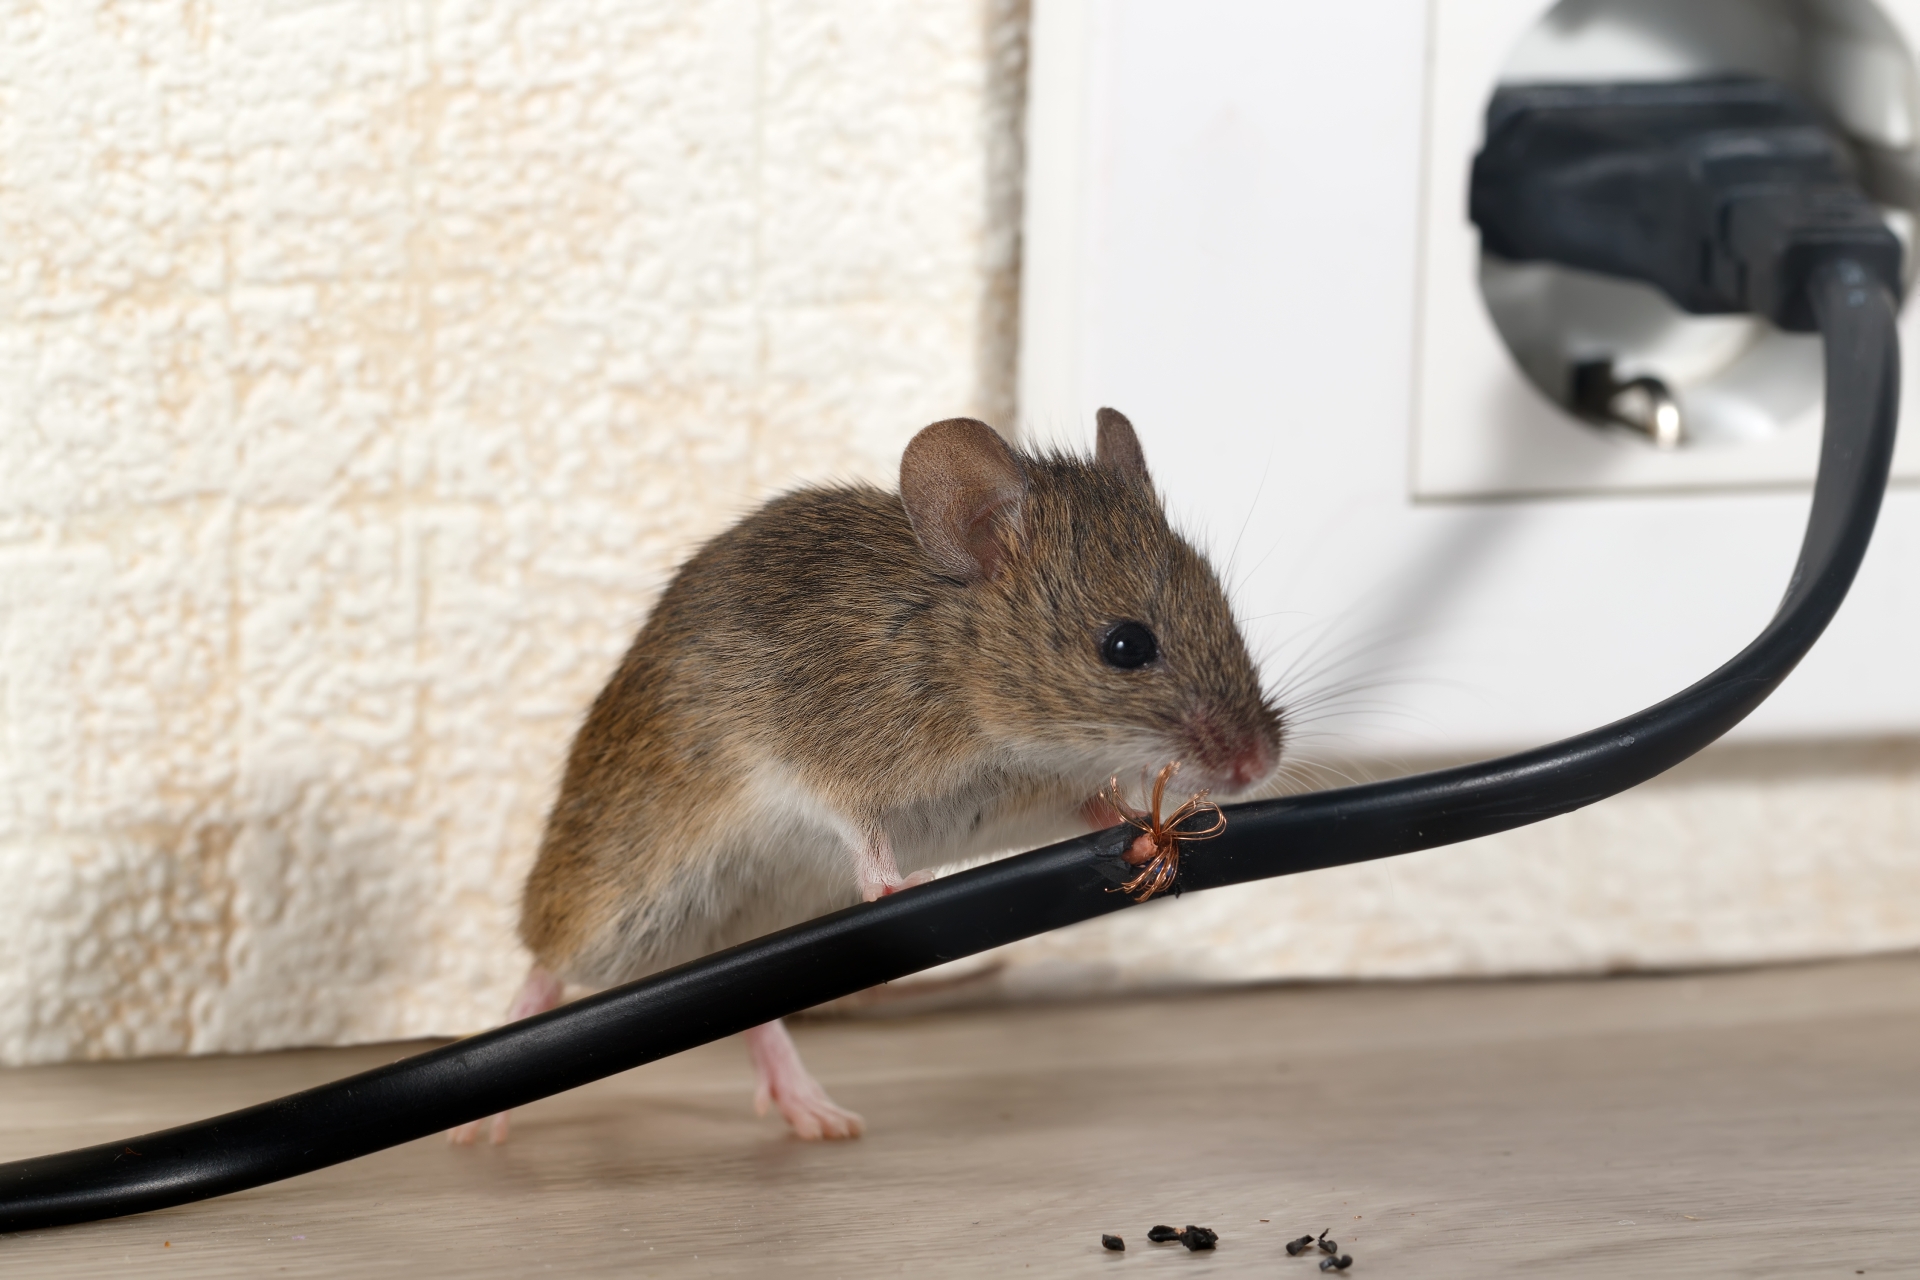 Mice Infestation, Pest Control in Regent's Park, NW1. Call Now 020 8166 9746